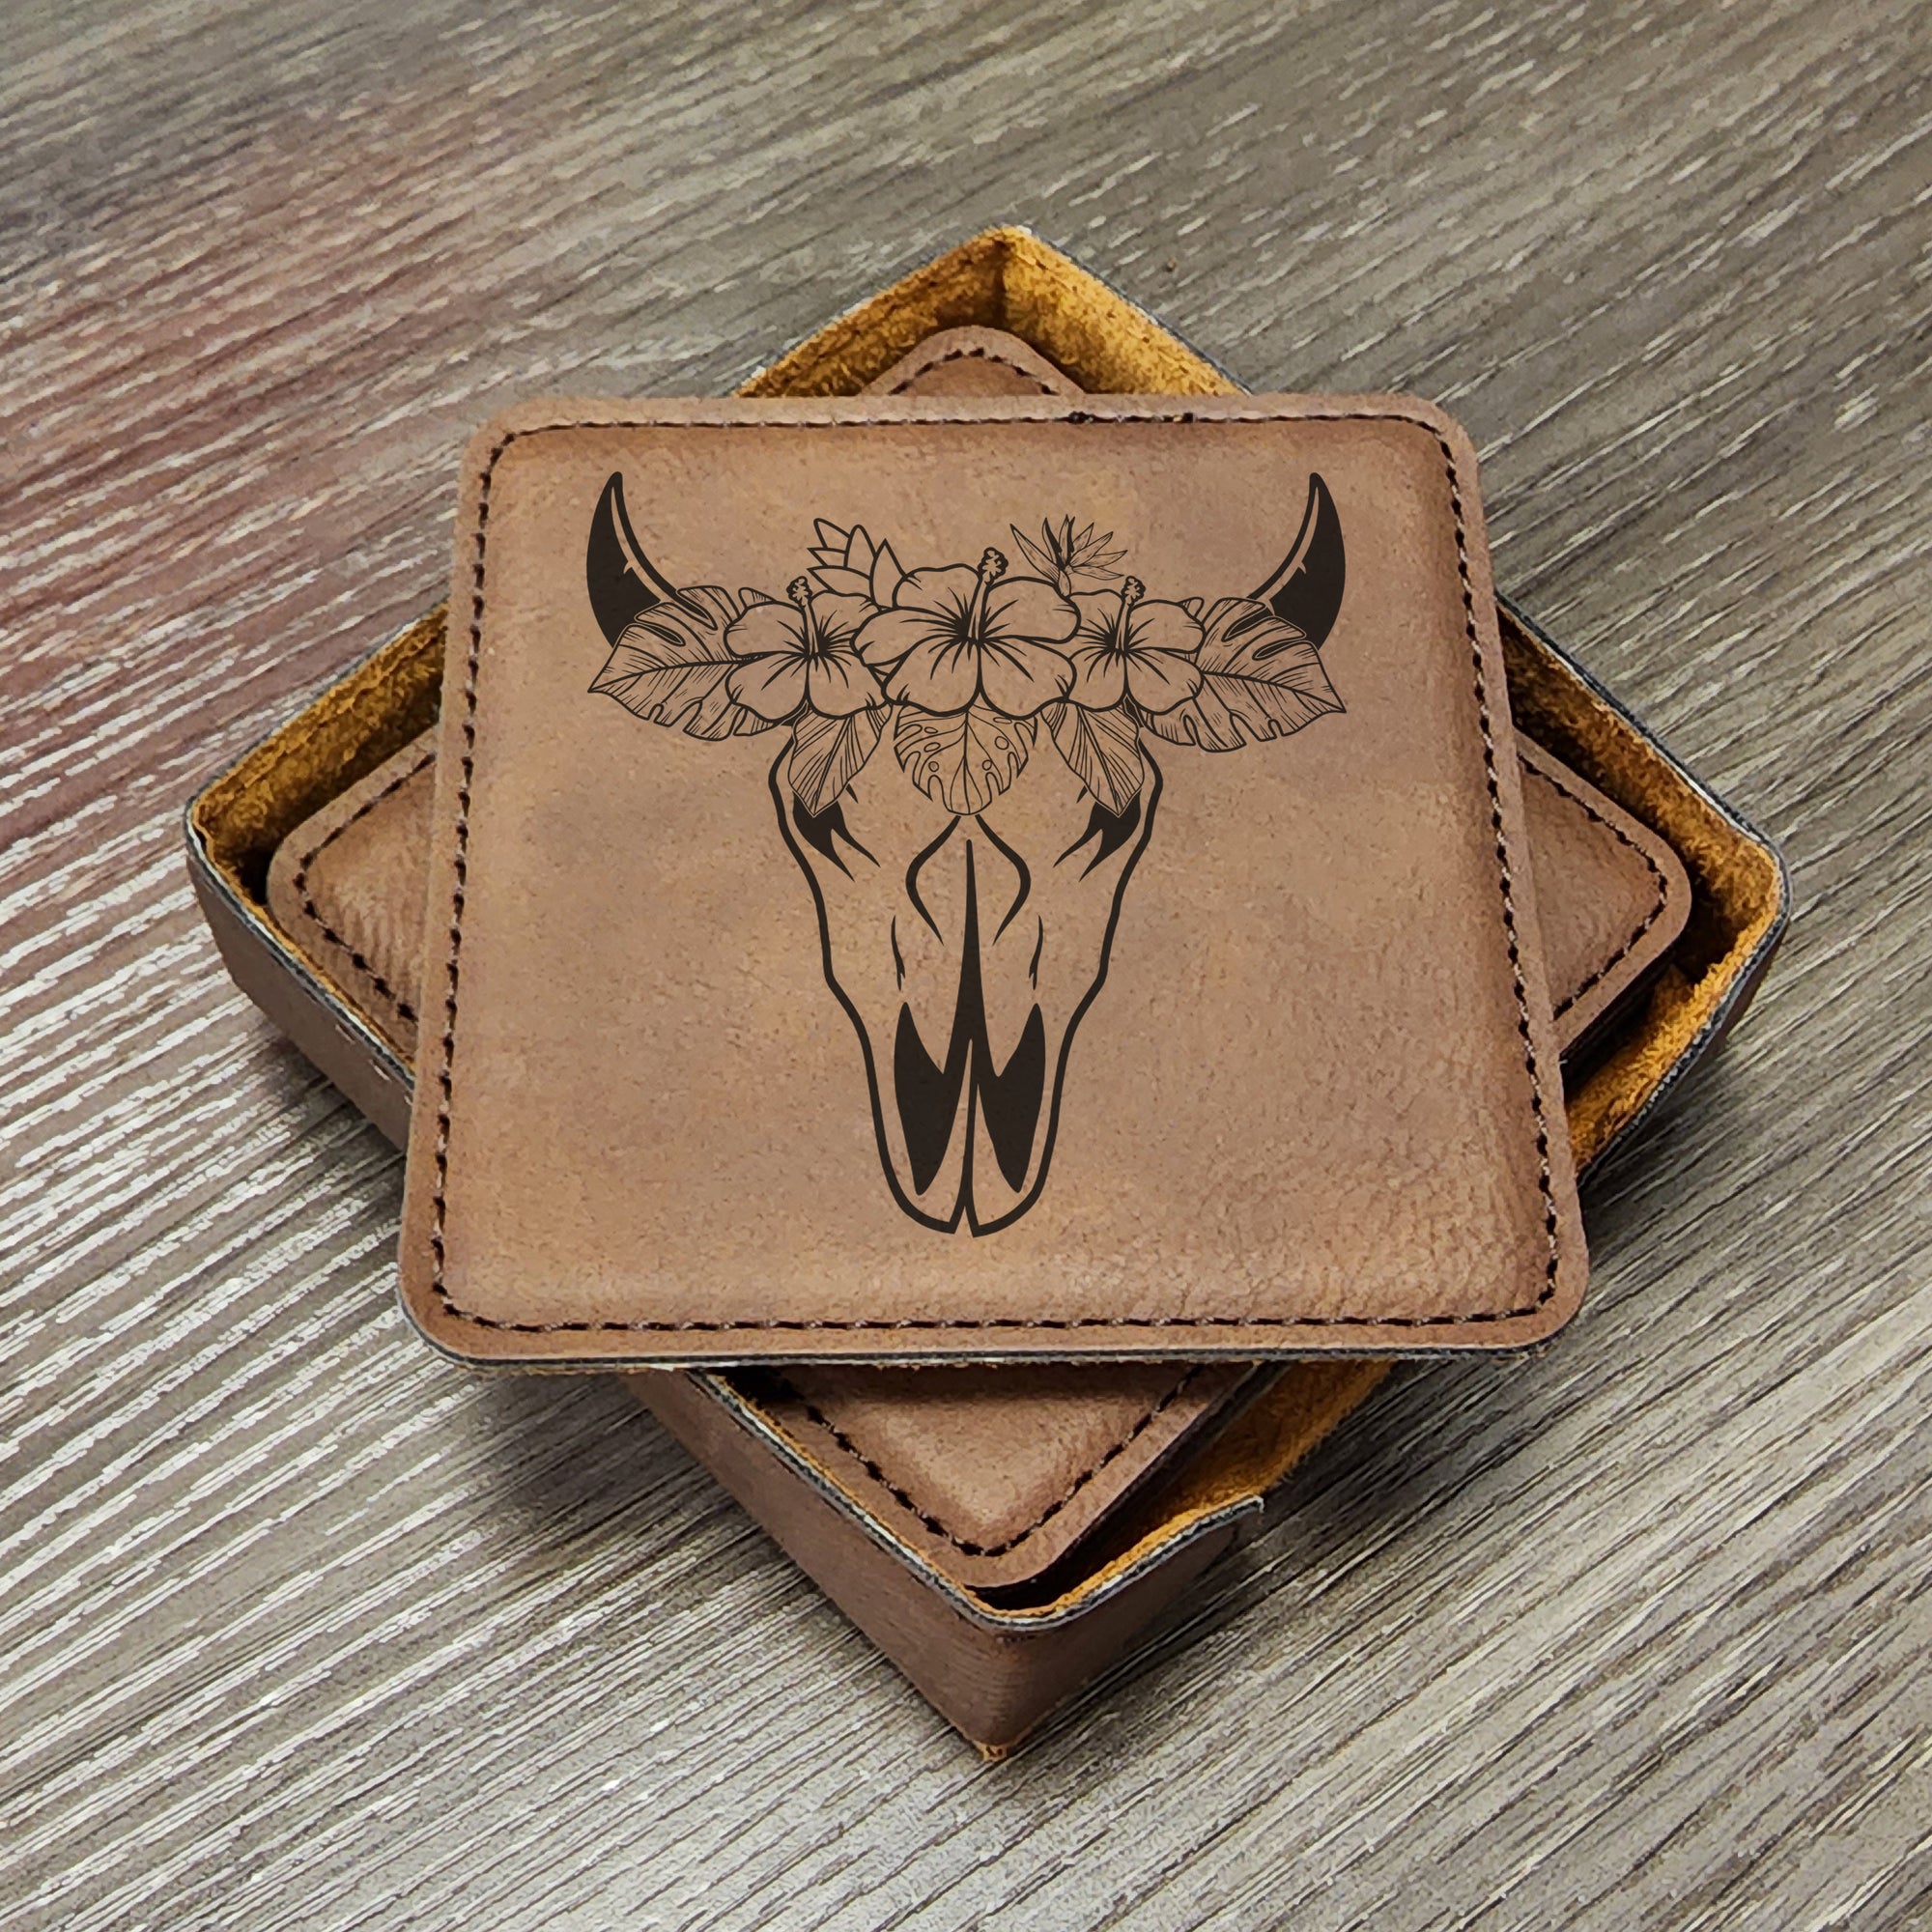 Western Coasters, Flower Cattle Skull Coaster, Beef Farmer Coasters, Cow Skull Coaster, Farmhouse Gifts, Bull Skull, Set of 6 With Holder vrs 1